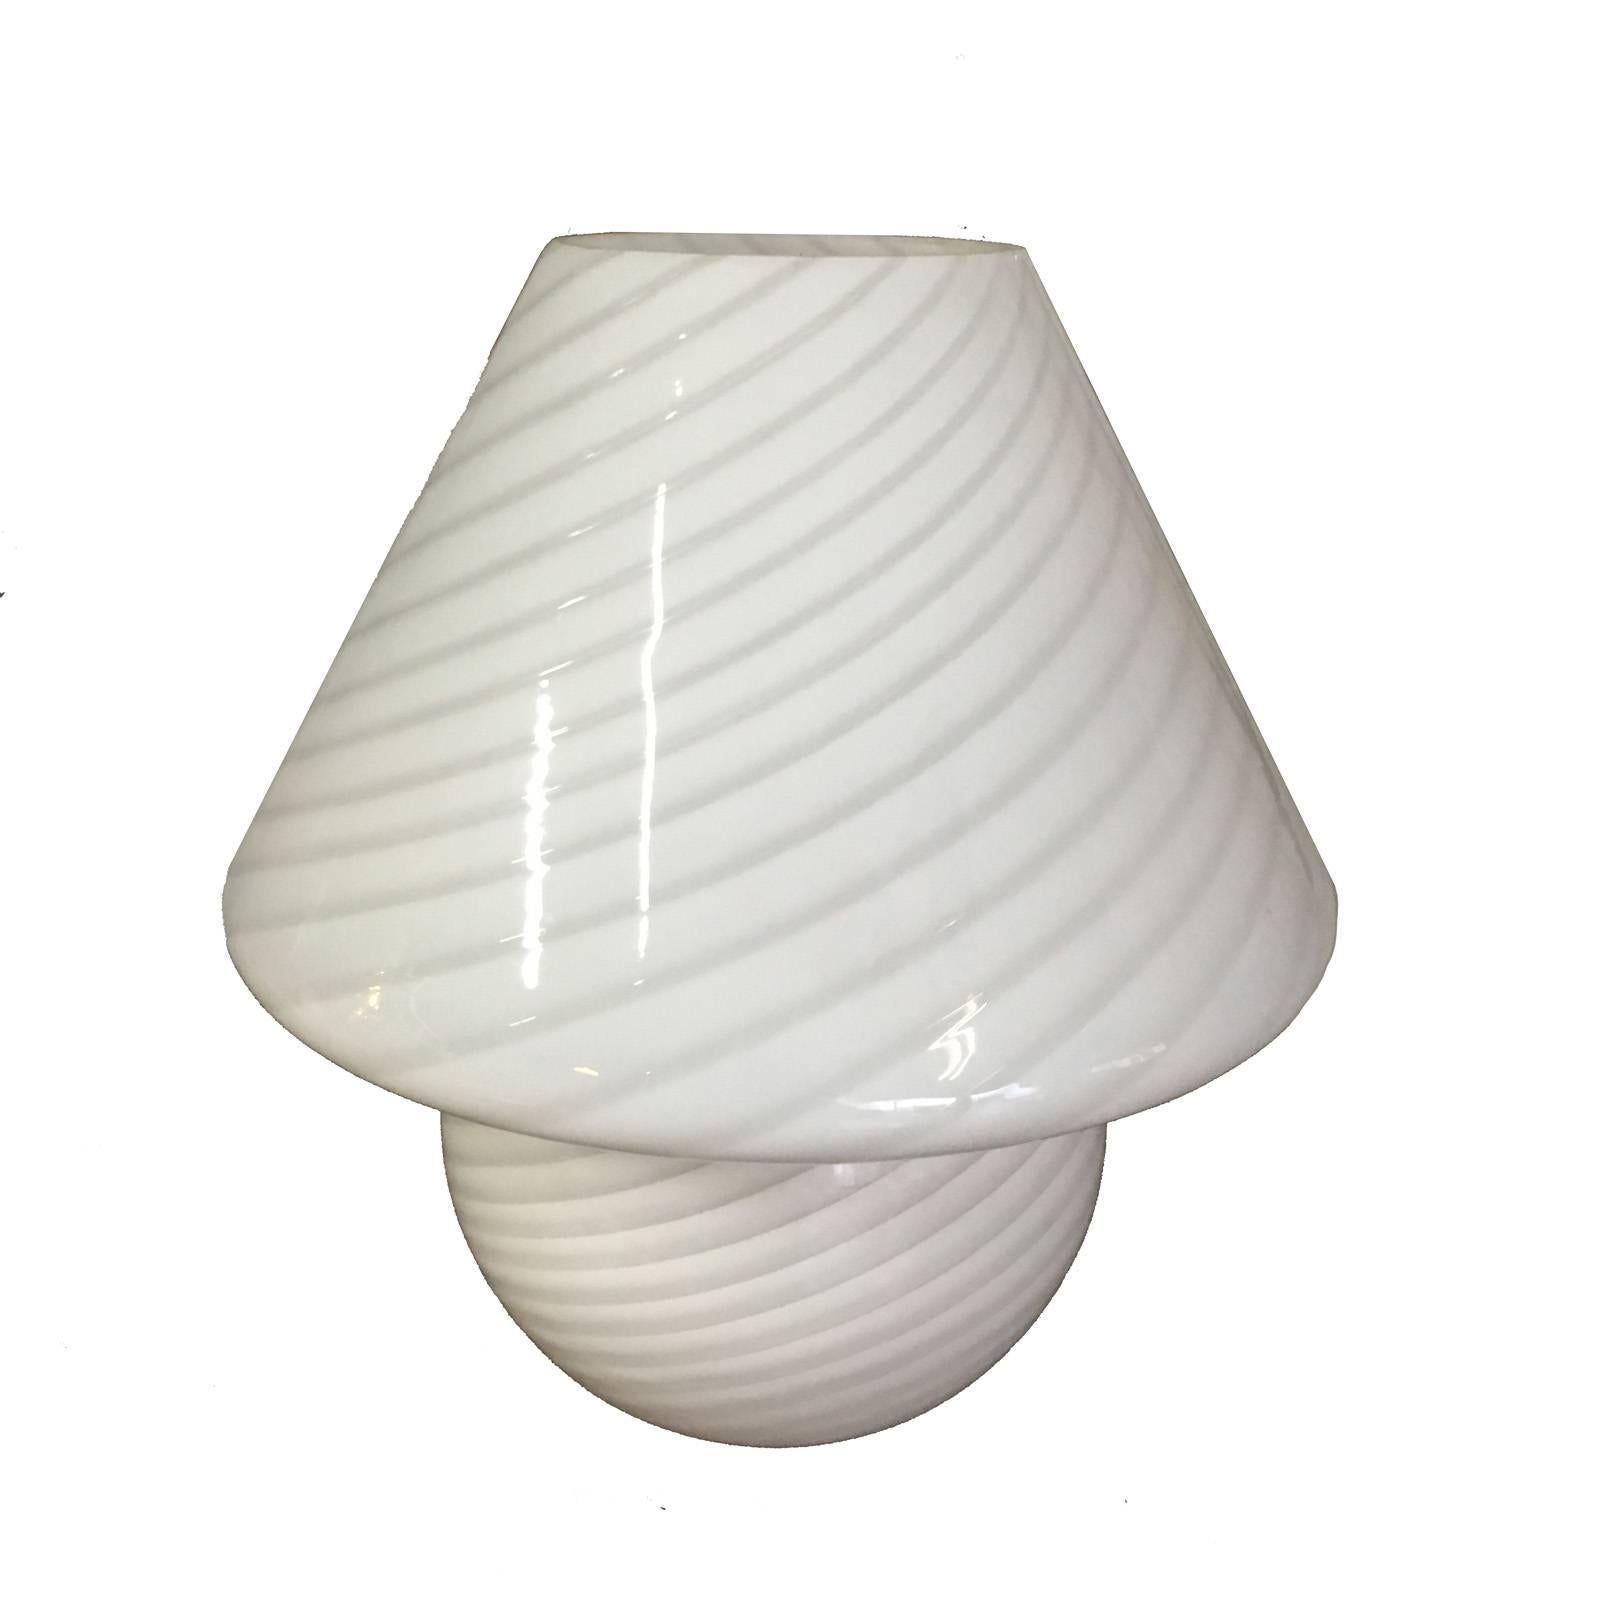 Unique swirled Murano glass lamp in mushroom form by Vetri.

A beautiful and very rare design, creating beautiful warmth in any space. A gorgeous example of 1970s design made from the highest quality Italian Murano glass,.